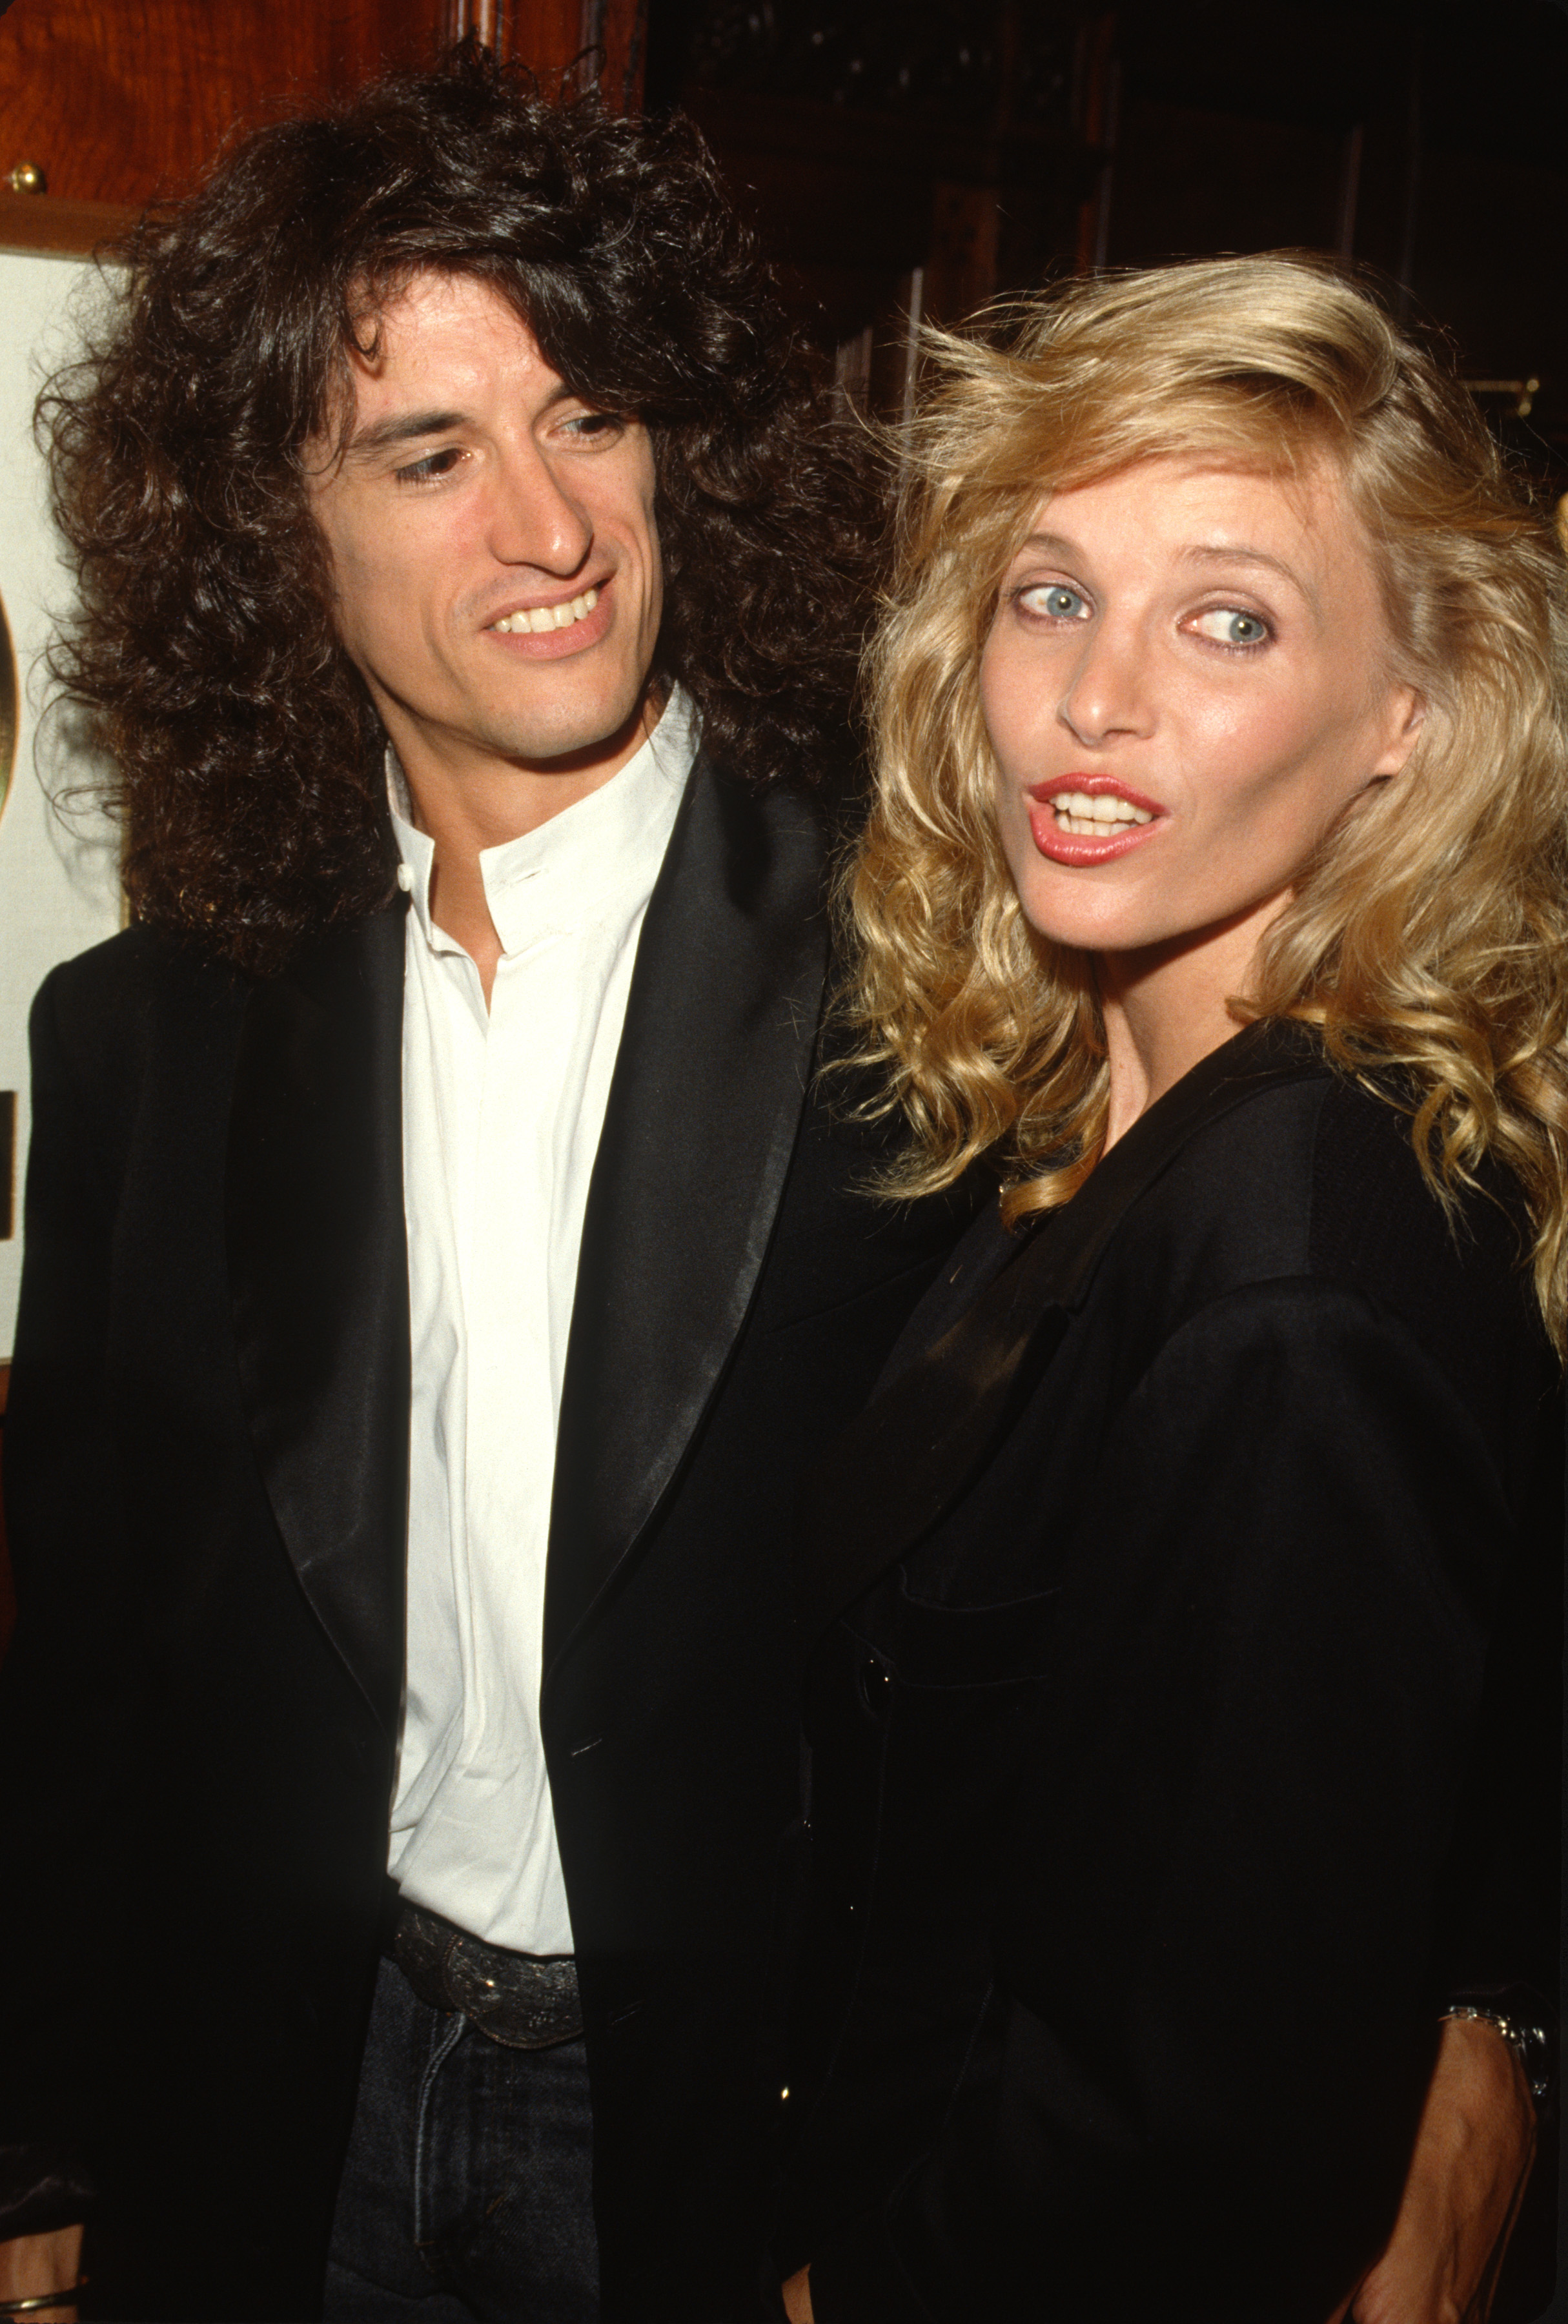 Joe Perry and Billie Paulette Montgomery in Boston, MA on September 12, 1989. | Source: Getty Images